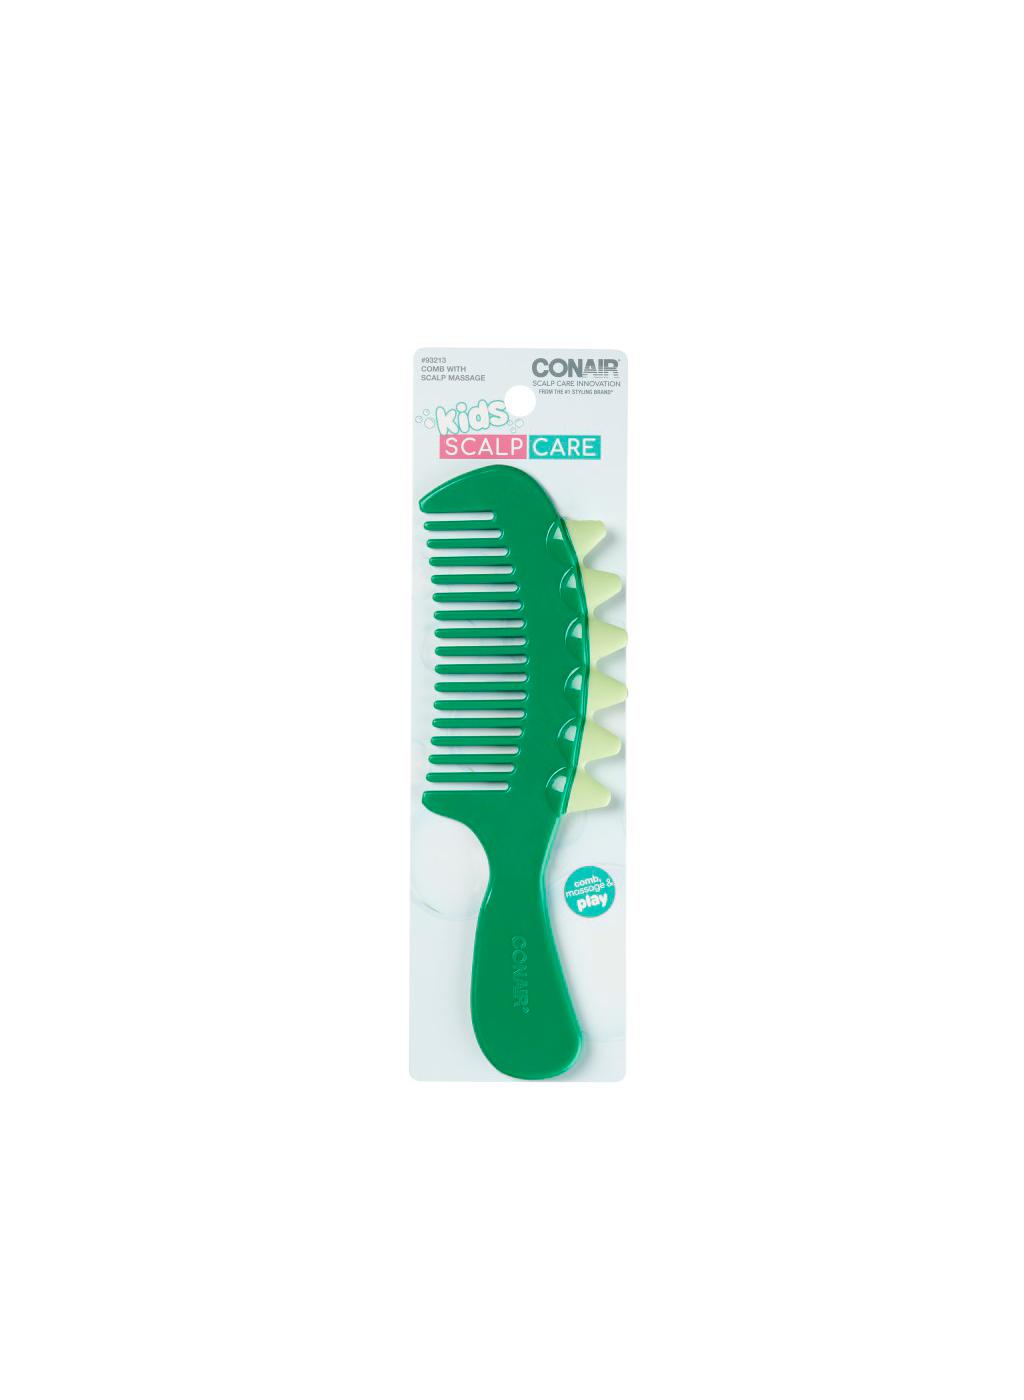 Conair Kids Scalp Care Hair Comb - Green; image 1 of 3